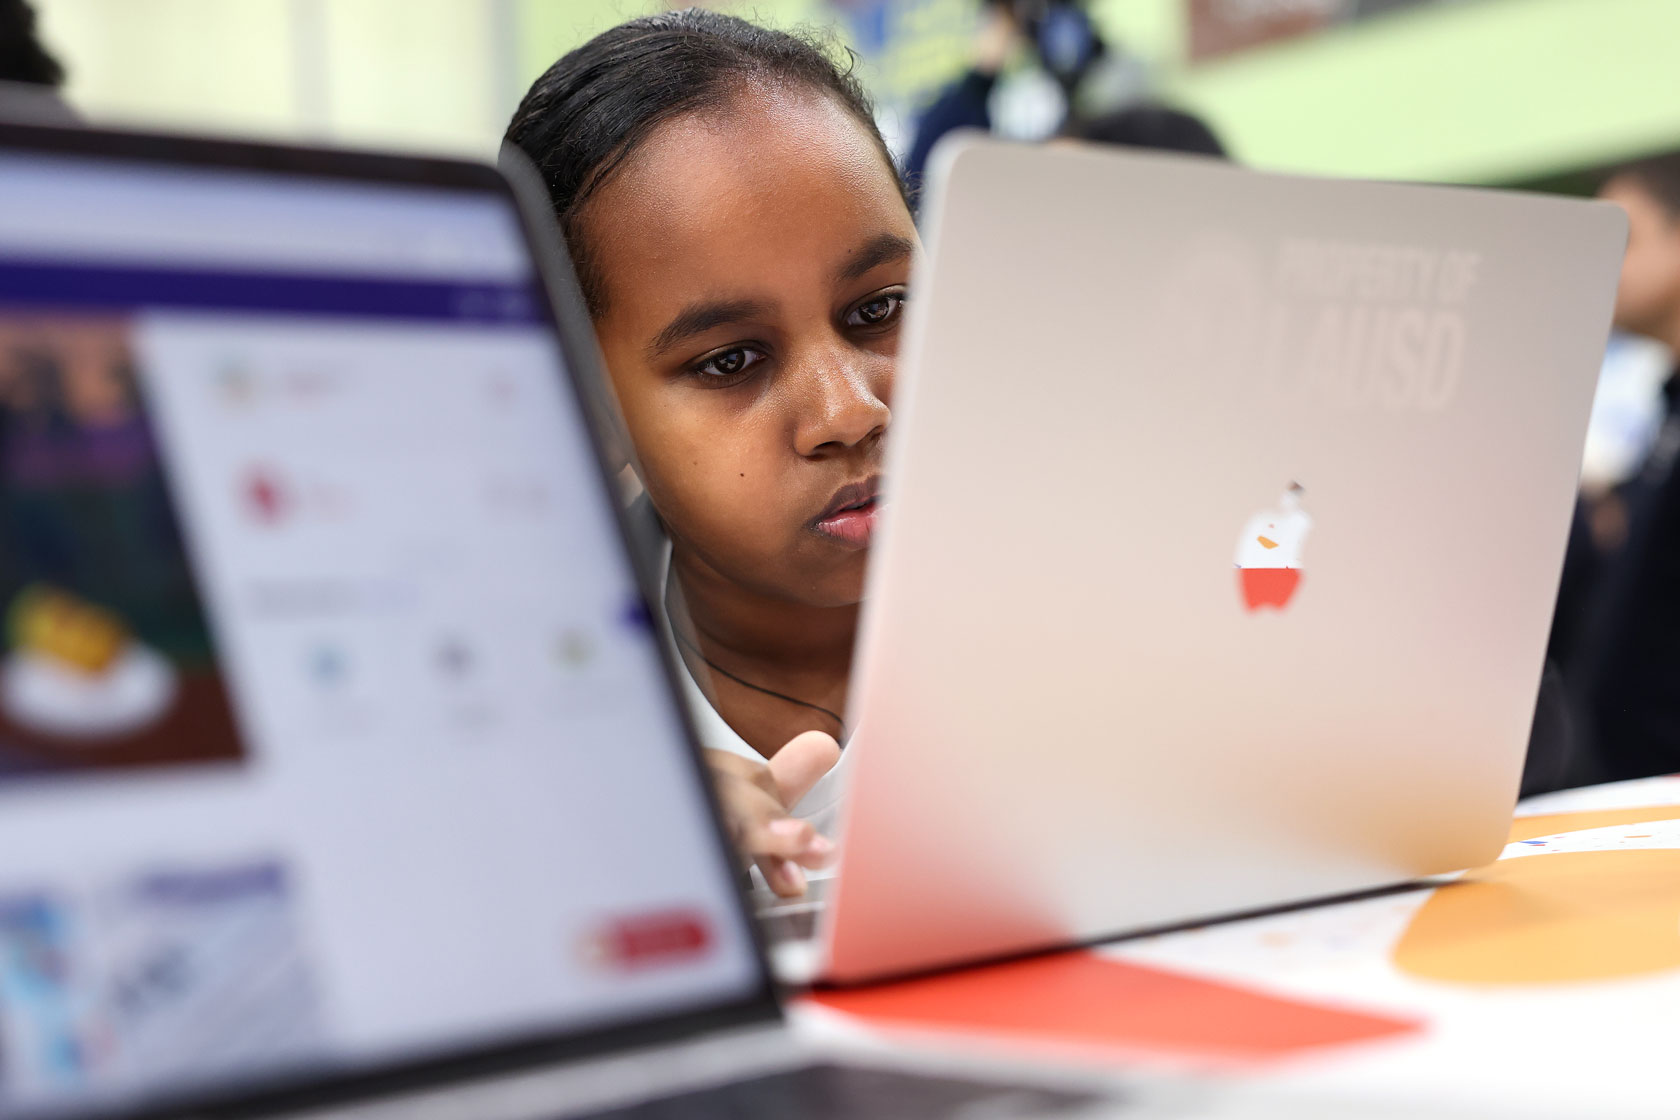 A young student is seen staring intently at a laptop screen.